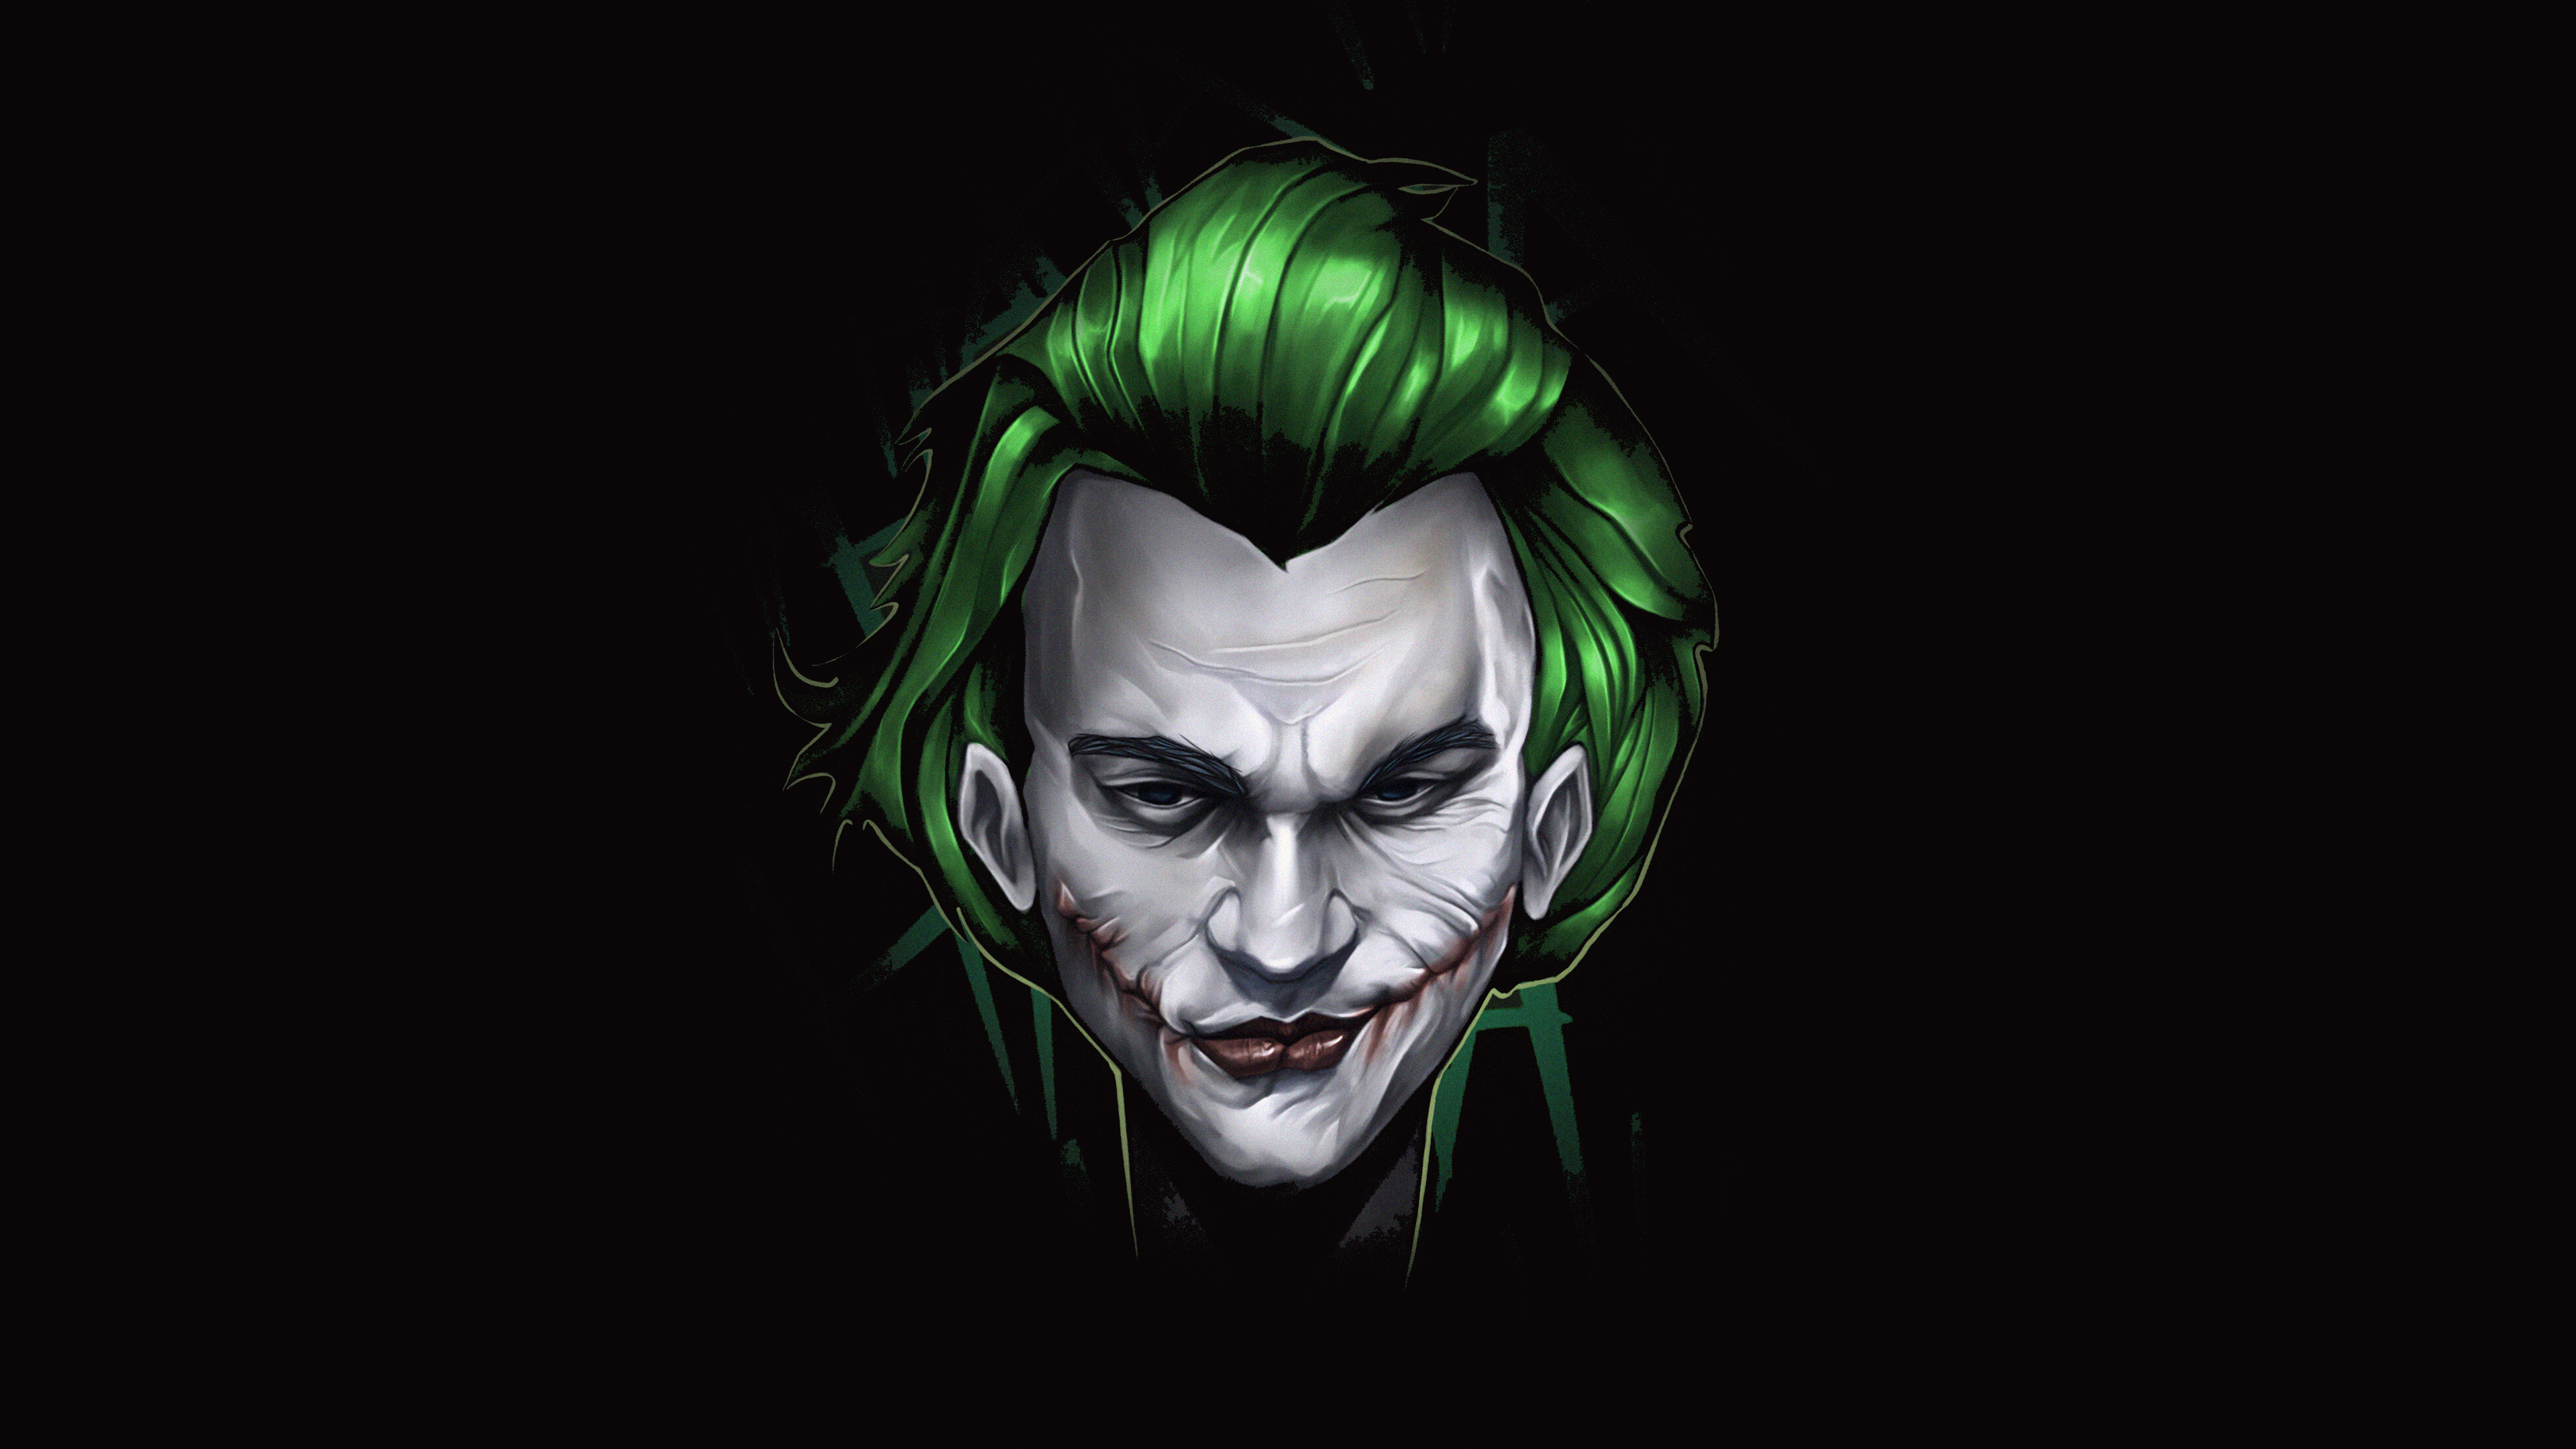 Joker Minimalist Wallpaper 4K : Check out this fantastic collection of ...